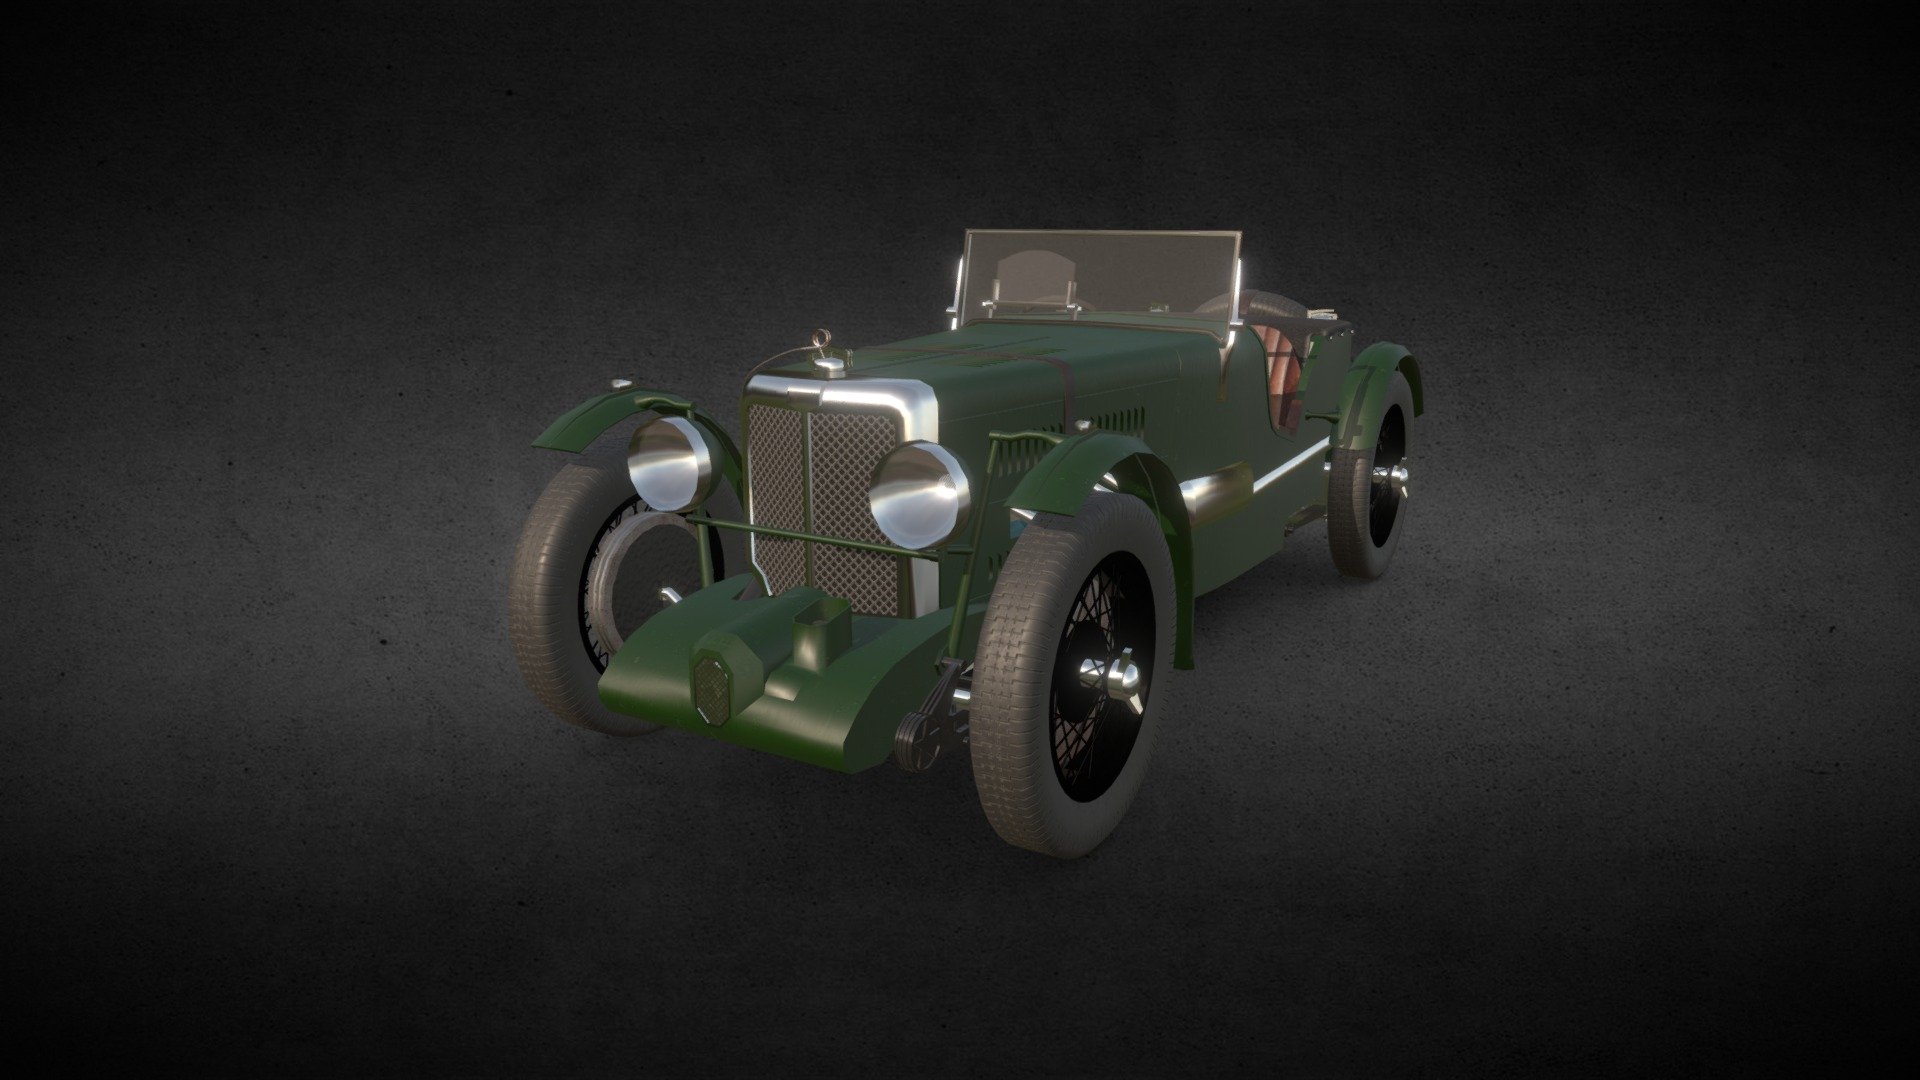 A simplified 3D model of MG K3 Magnette from 1933.

Modeled in Blender 2.92. Textured in Inkscape (bump maps later converted to normal maps) and Quixel Mixer.

I hope you'd like it :) - (Mid-poly) MG K3 Magnette - 3D model by KrStolorz 3d model